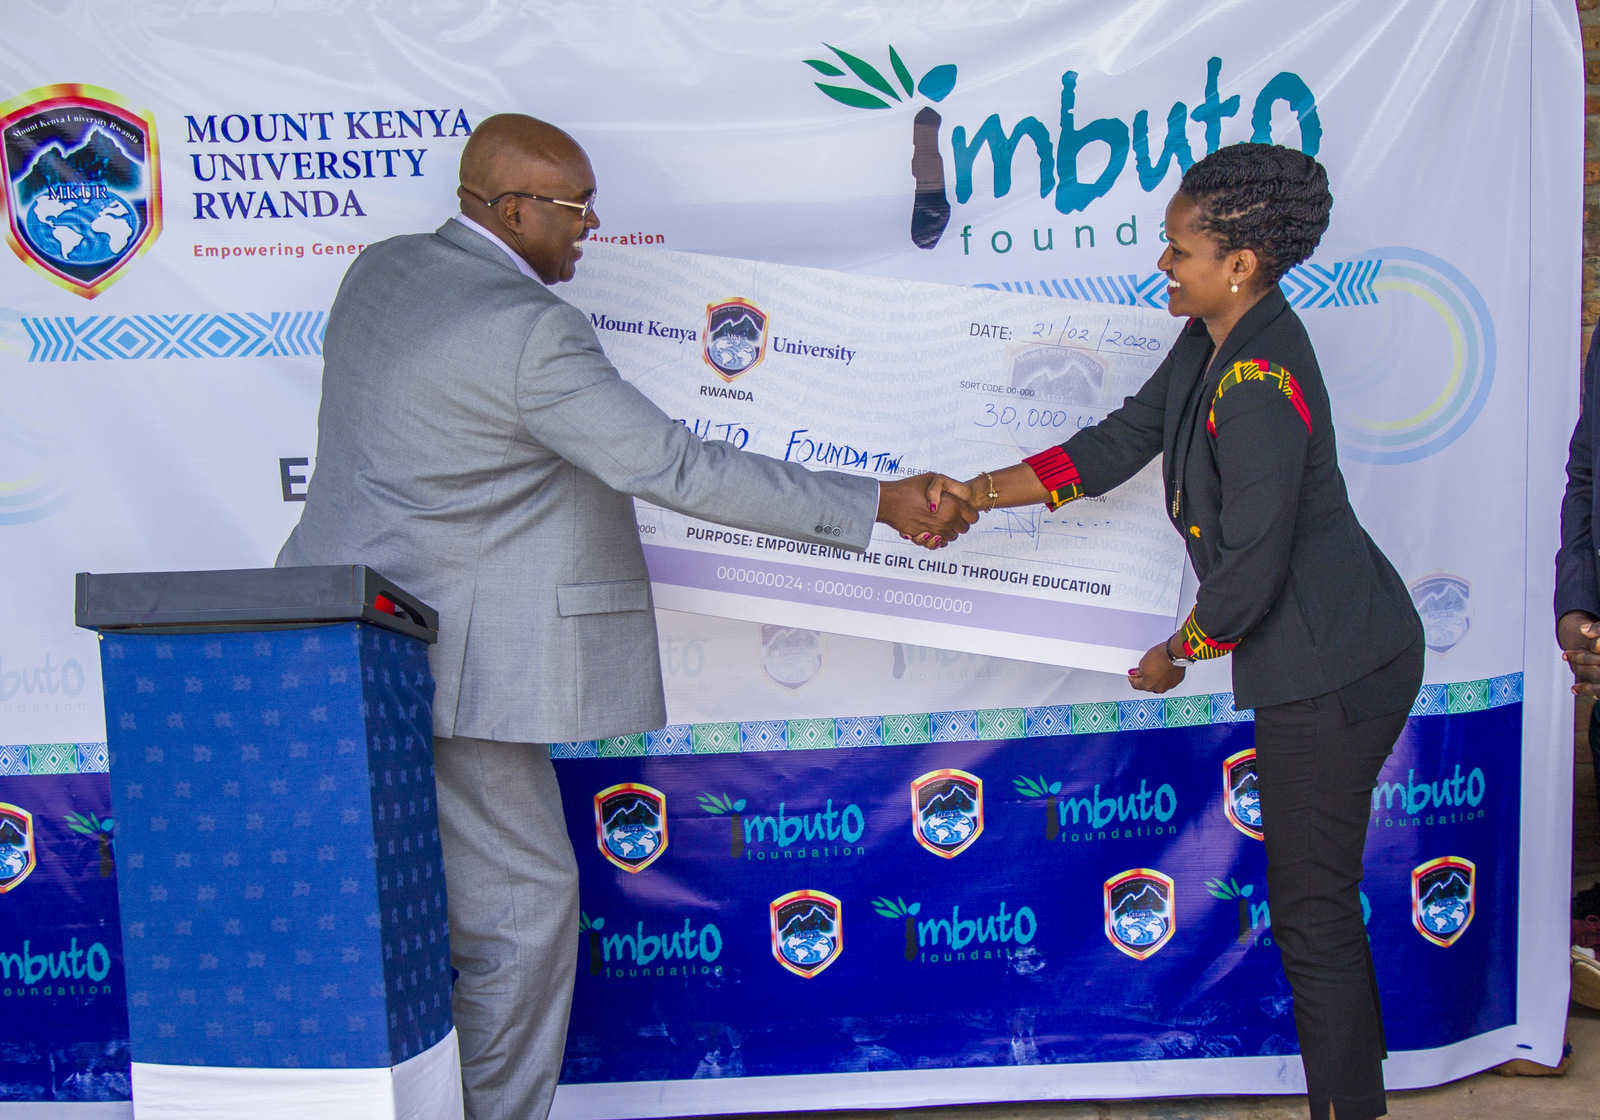 Chairman and Founder of Mount Kenya University, Prof Simon Gicharu (L) hands over a $30,000 cheque to the Director General of Imbuto Foundation, Sandrine Umutoni.  